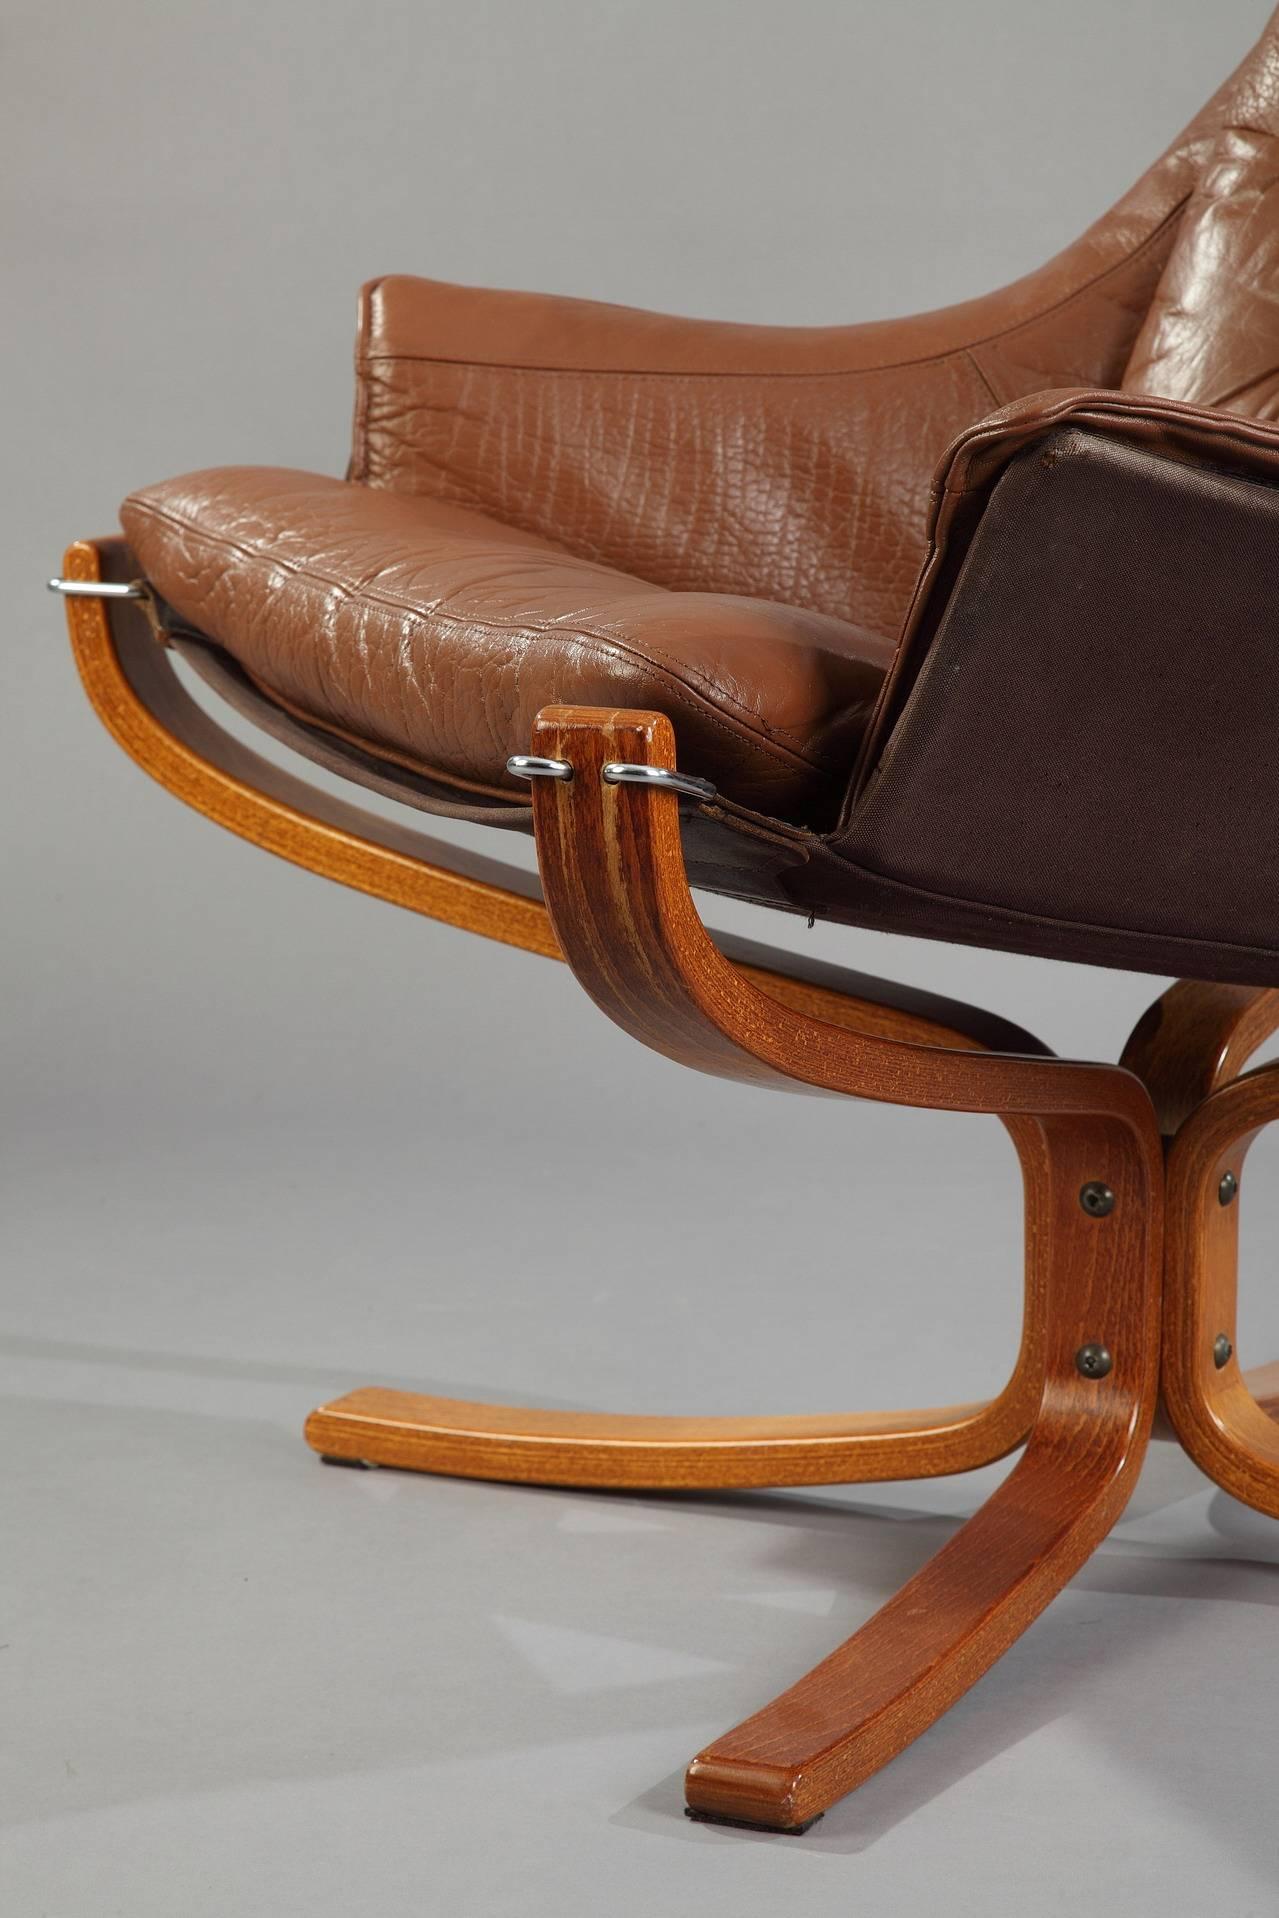 Falcon armchair with stained beech structure and canvas sling seat. Loose cushions upholstered with brown leather. Designed by Sigurd Ressell in Norway in the 1970s, manufactured by Vatne Mobler in the 1980s,

circa 1980
Dimension: W 31.1 in, D